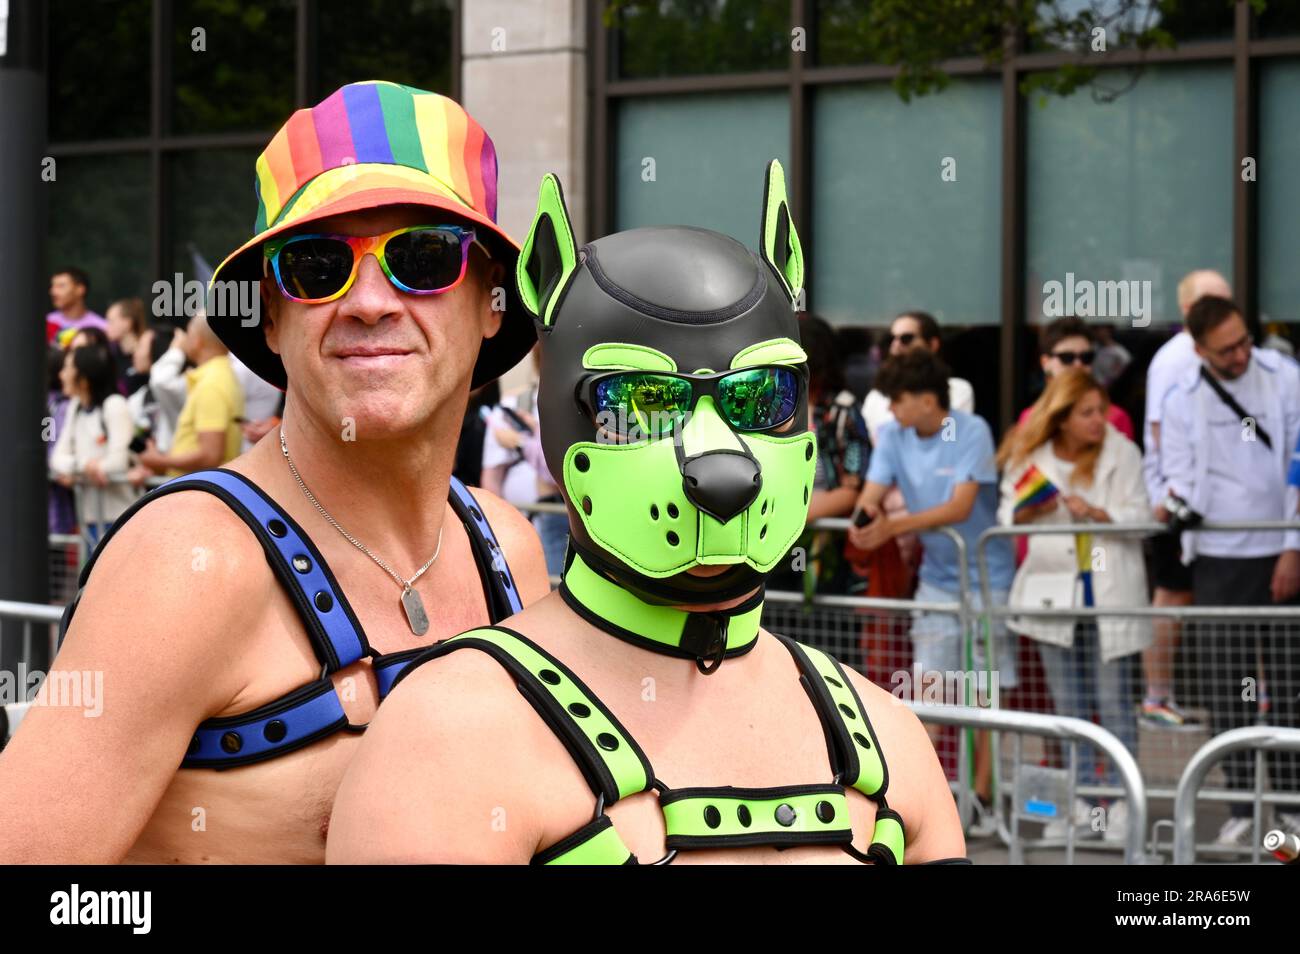 London, UK. Pride in London 2023. The UK's biggest, most diverse coming together of every part of London's LGBTQ+  community where approx 600 groups are set to participate. Credit: michael melia/Alamy Live News Stock Photo